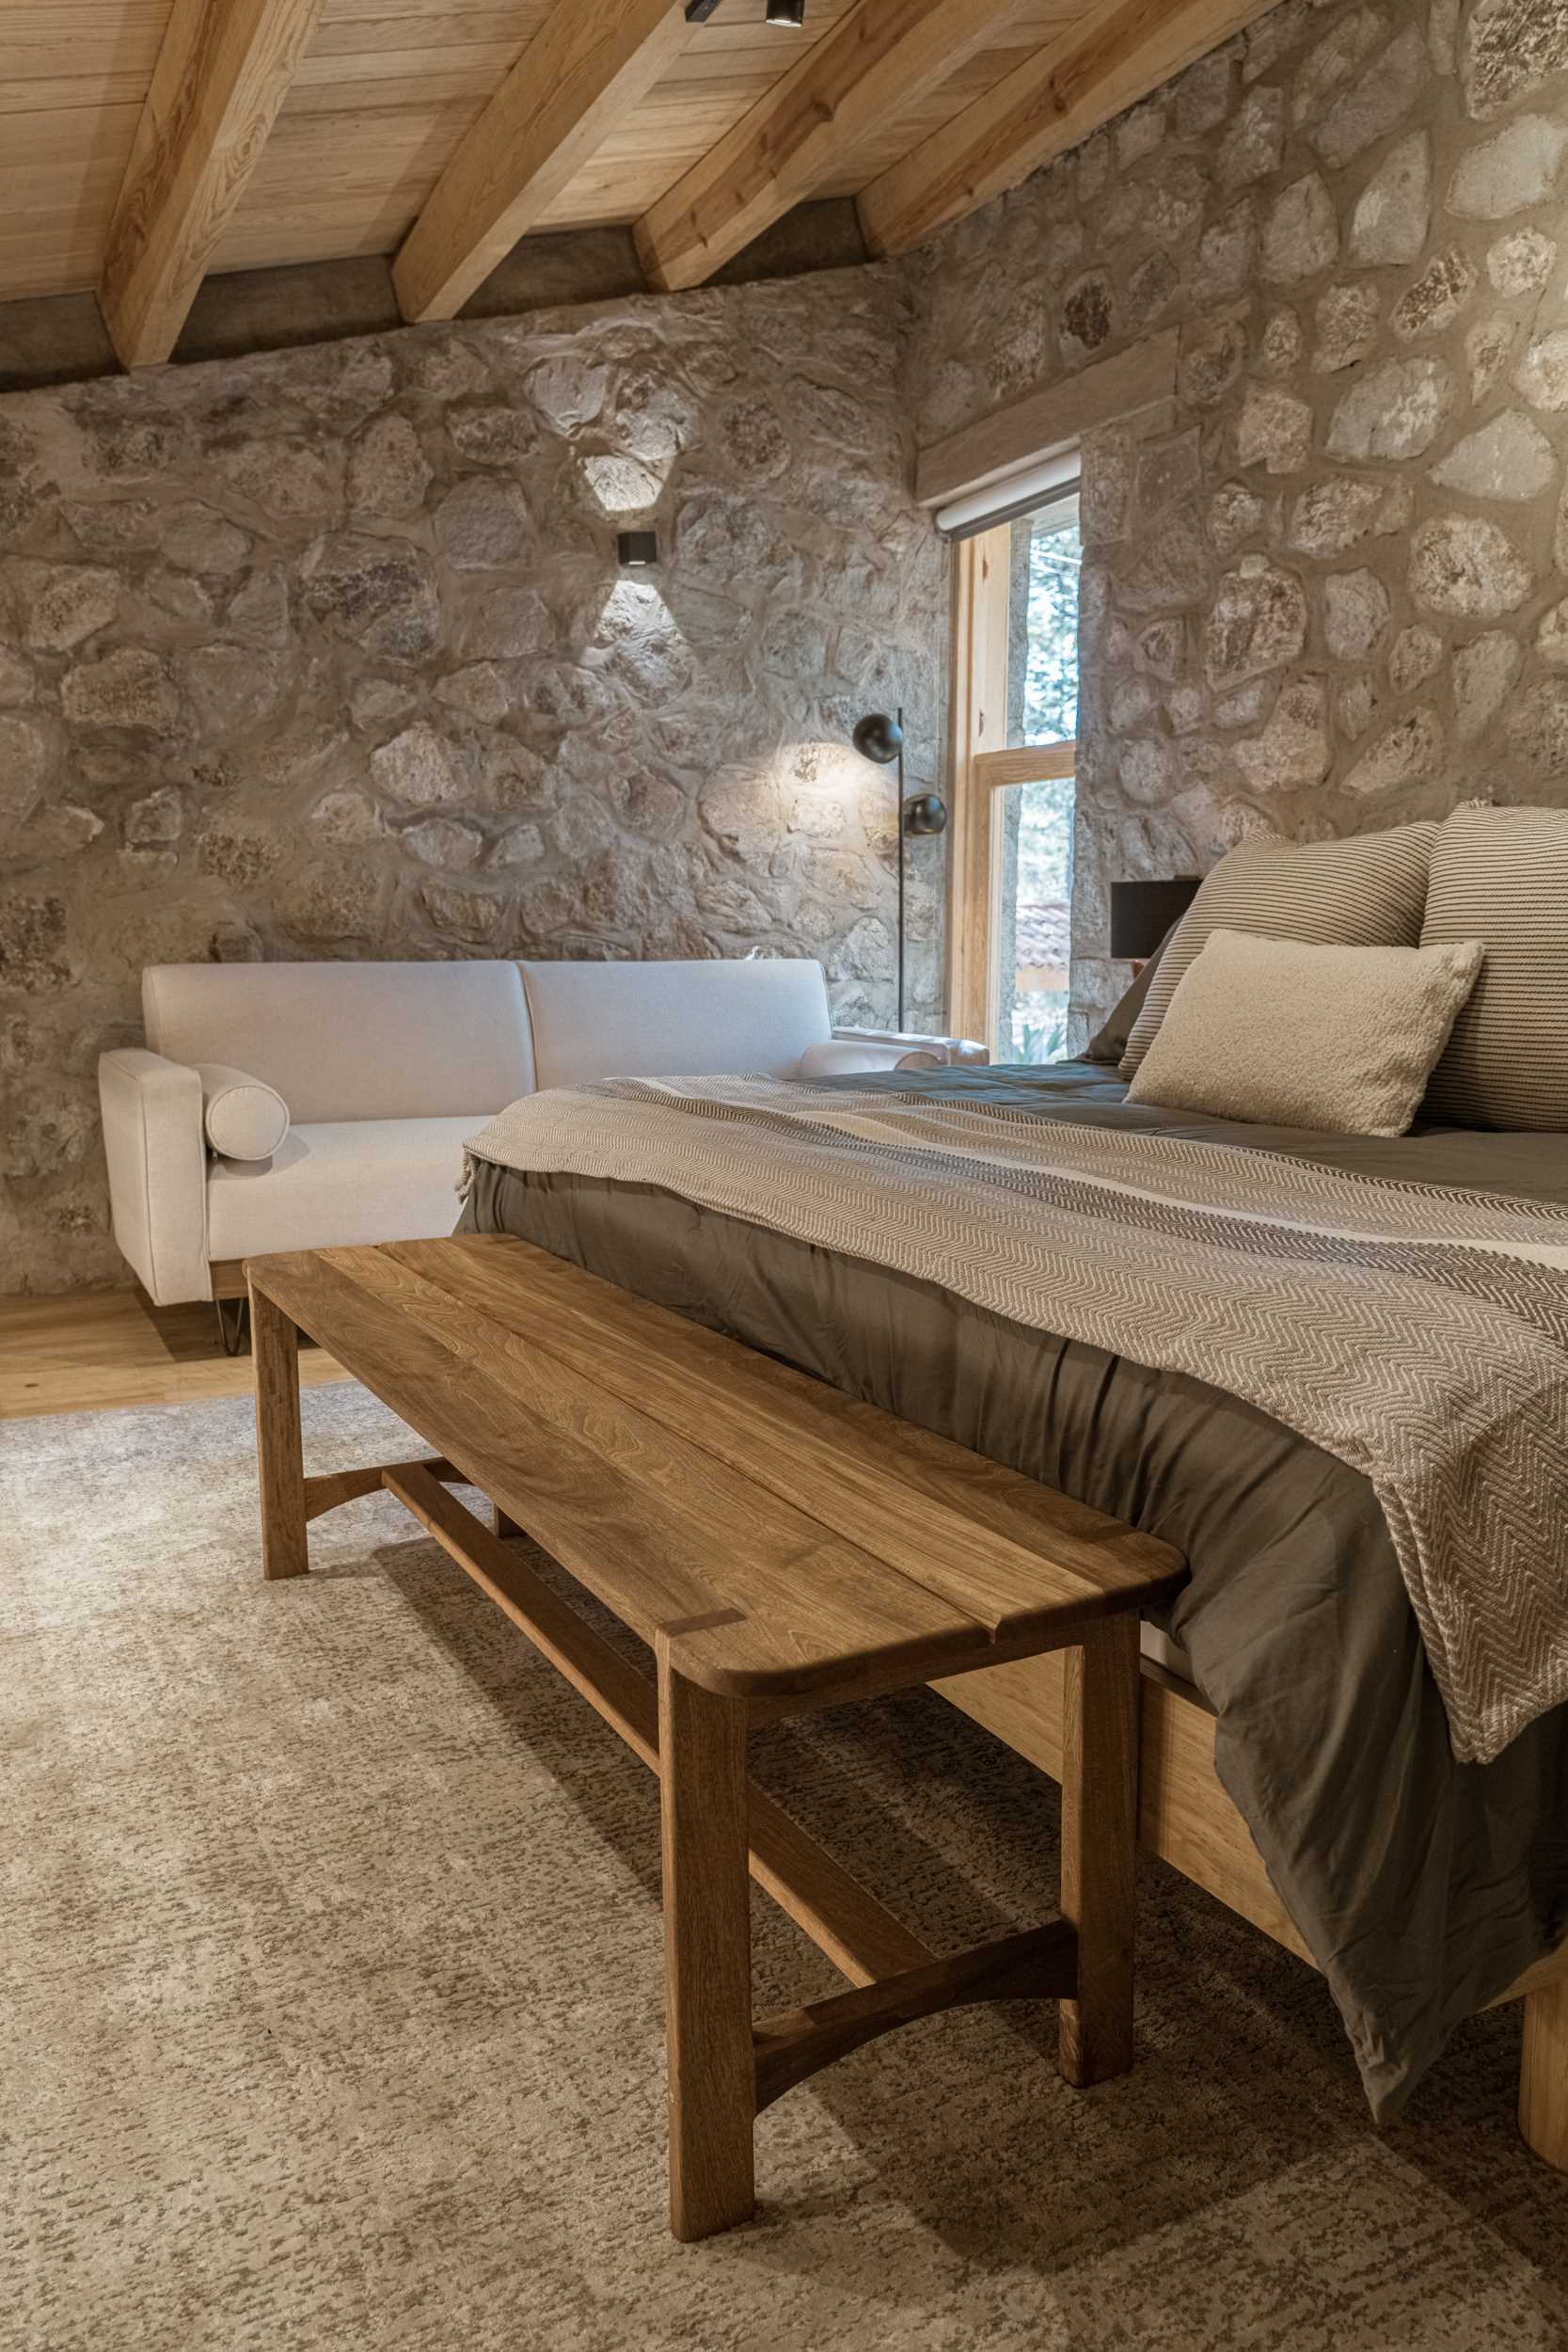 A modern loft bedroom with stone walls, wood floors, and cozy furniture.